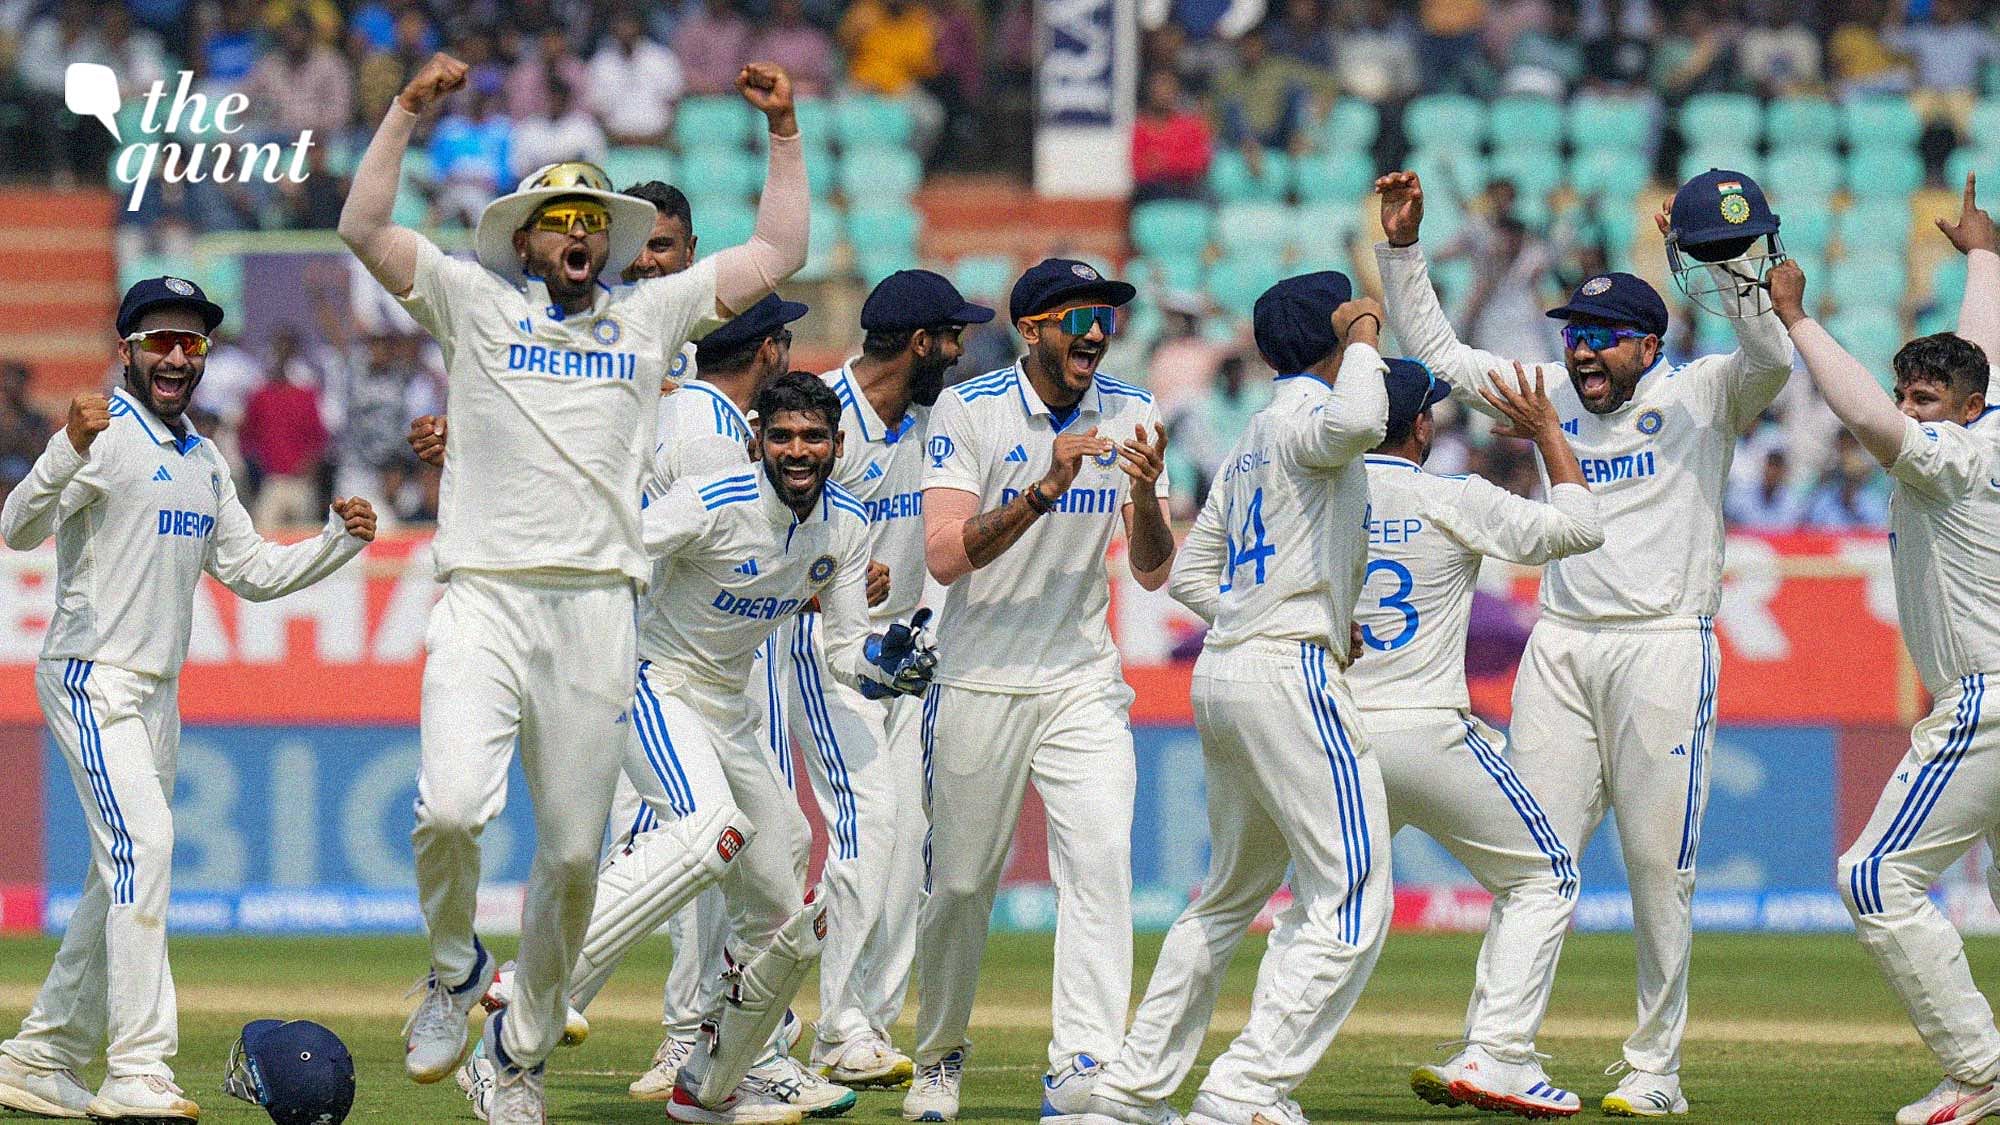 <div class="paragraphs"><p>India vs England, 2nd Test: From Yashasvi Jaiswal scoring a double century to Jasprit Bumrah picking up 9 wickets – five biggest moments from the game.</p></div>